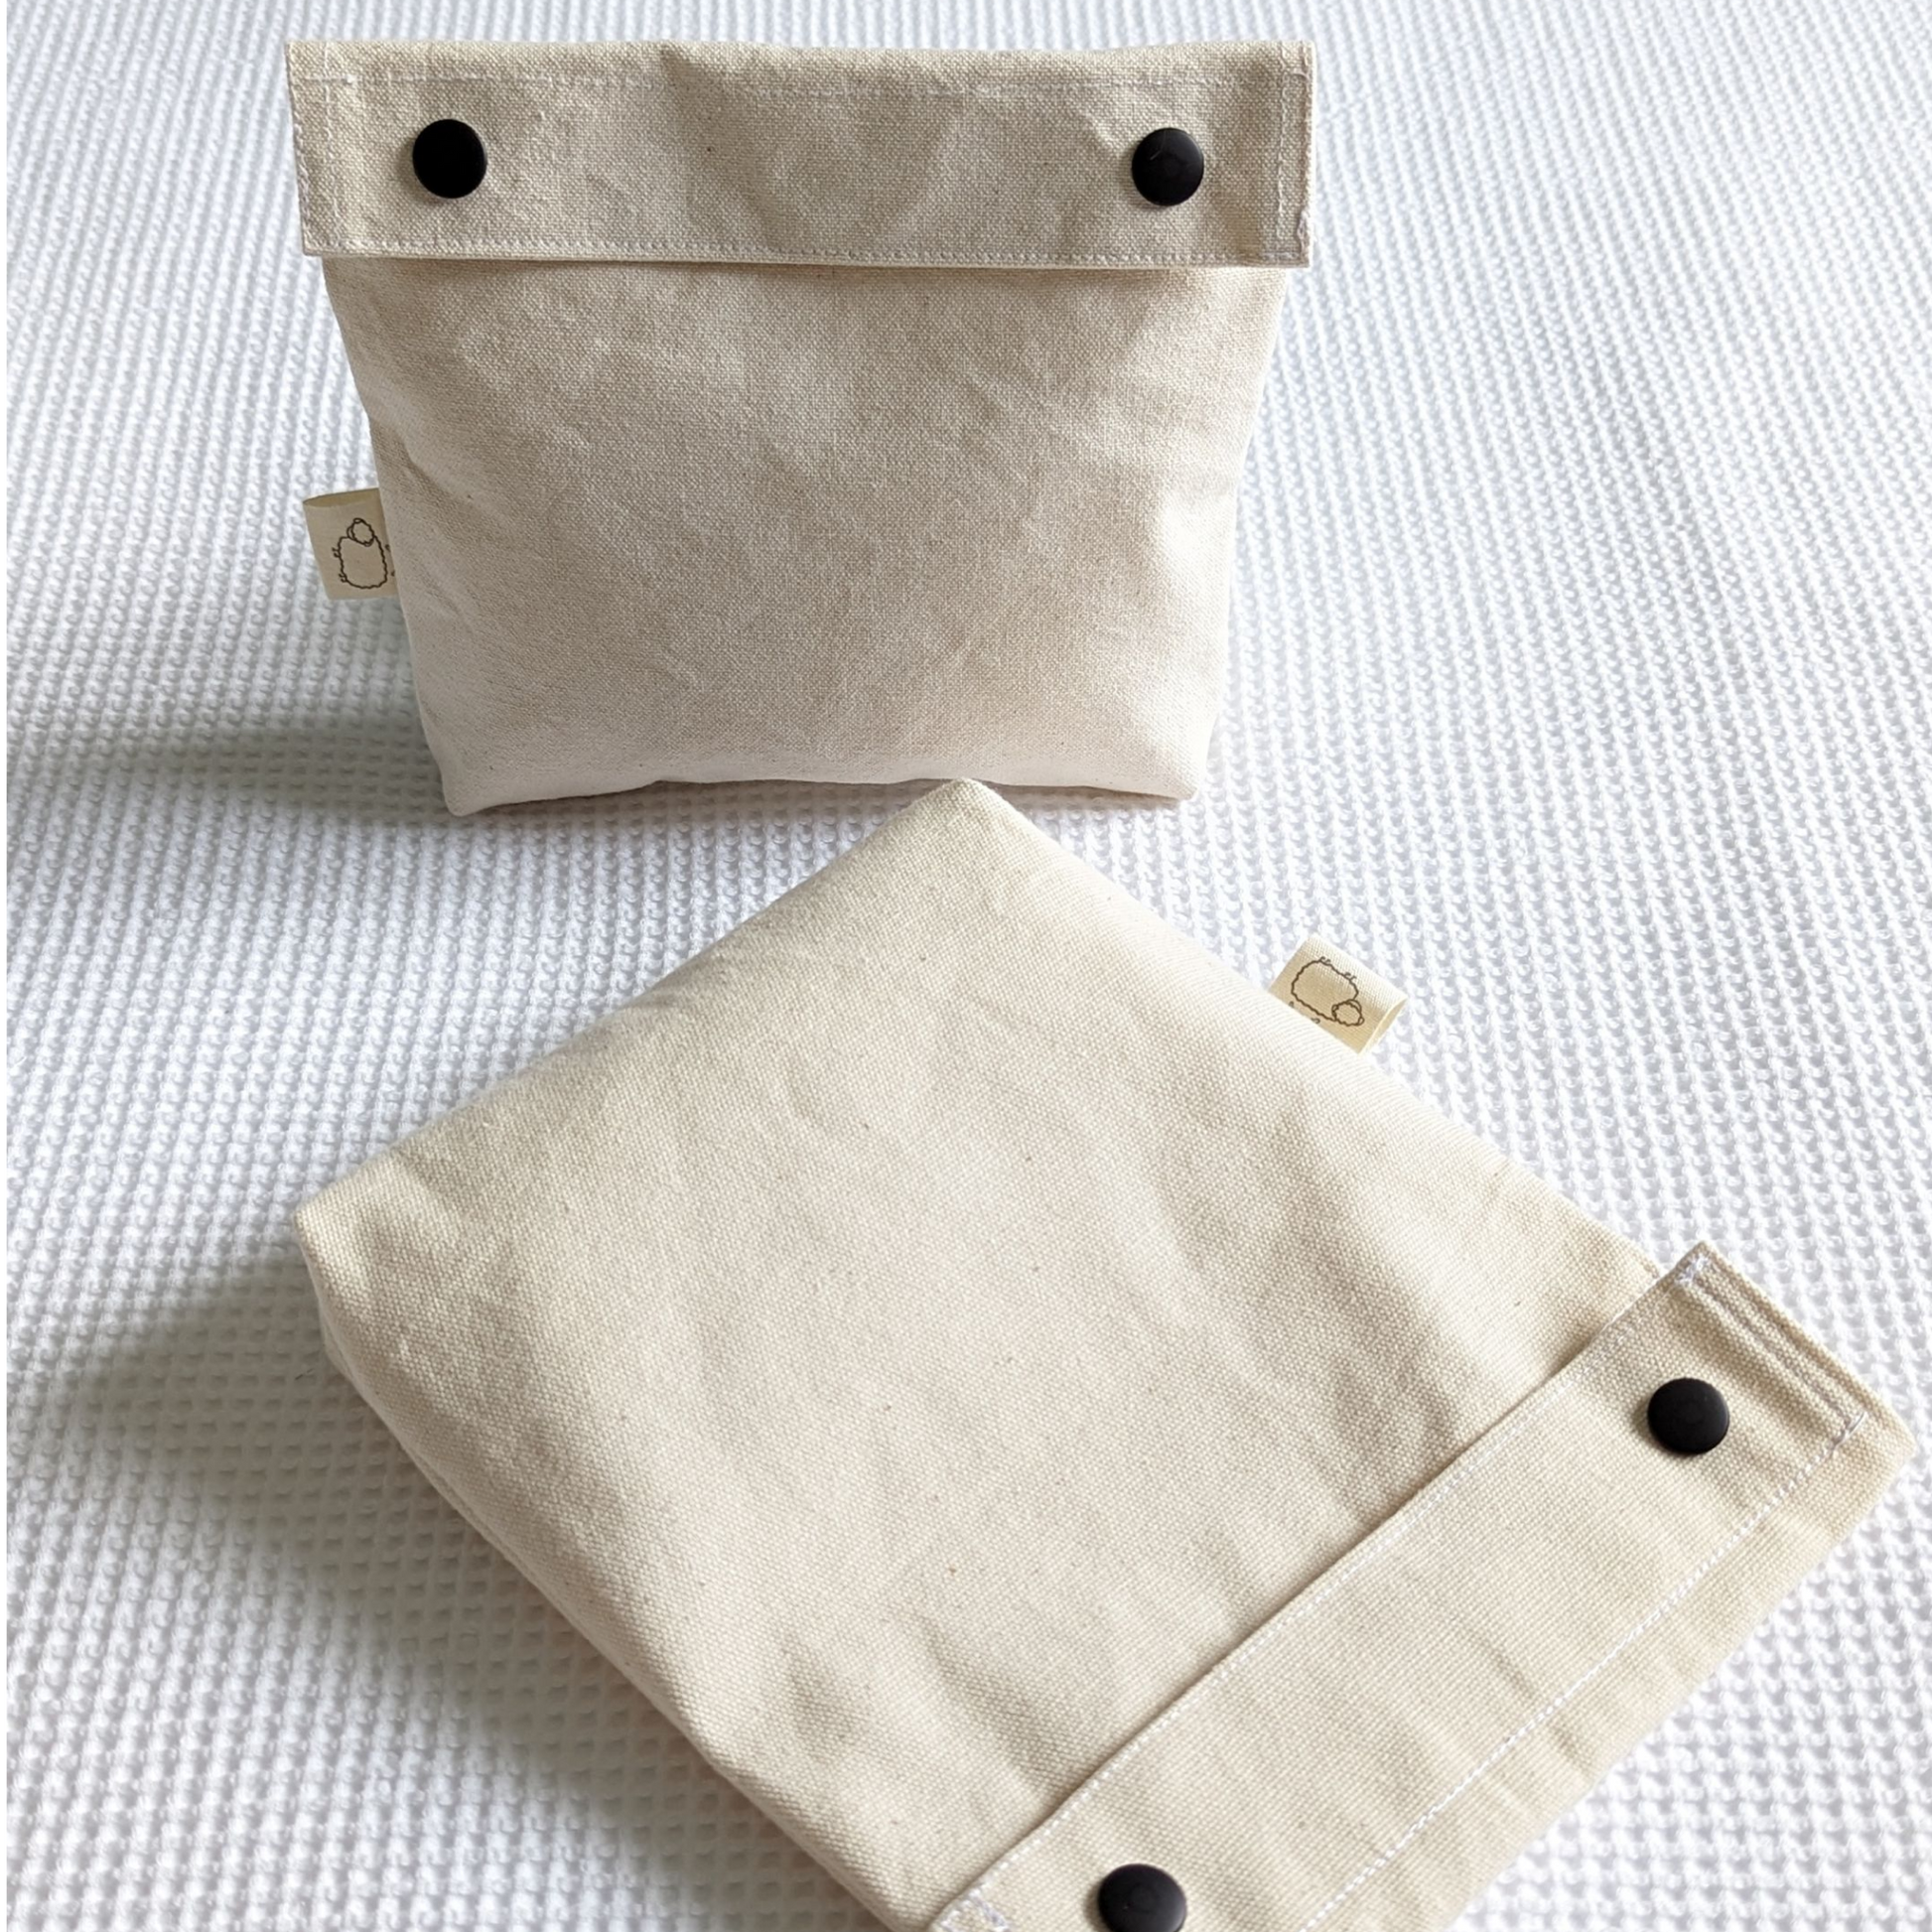 Wooly Tops cotton canvas snap bags in large and small with black brass snaps.